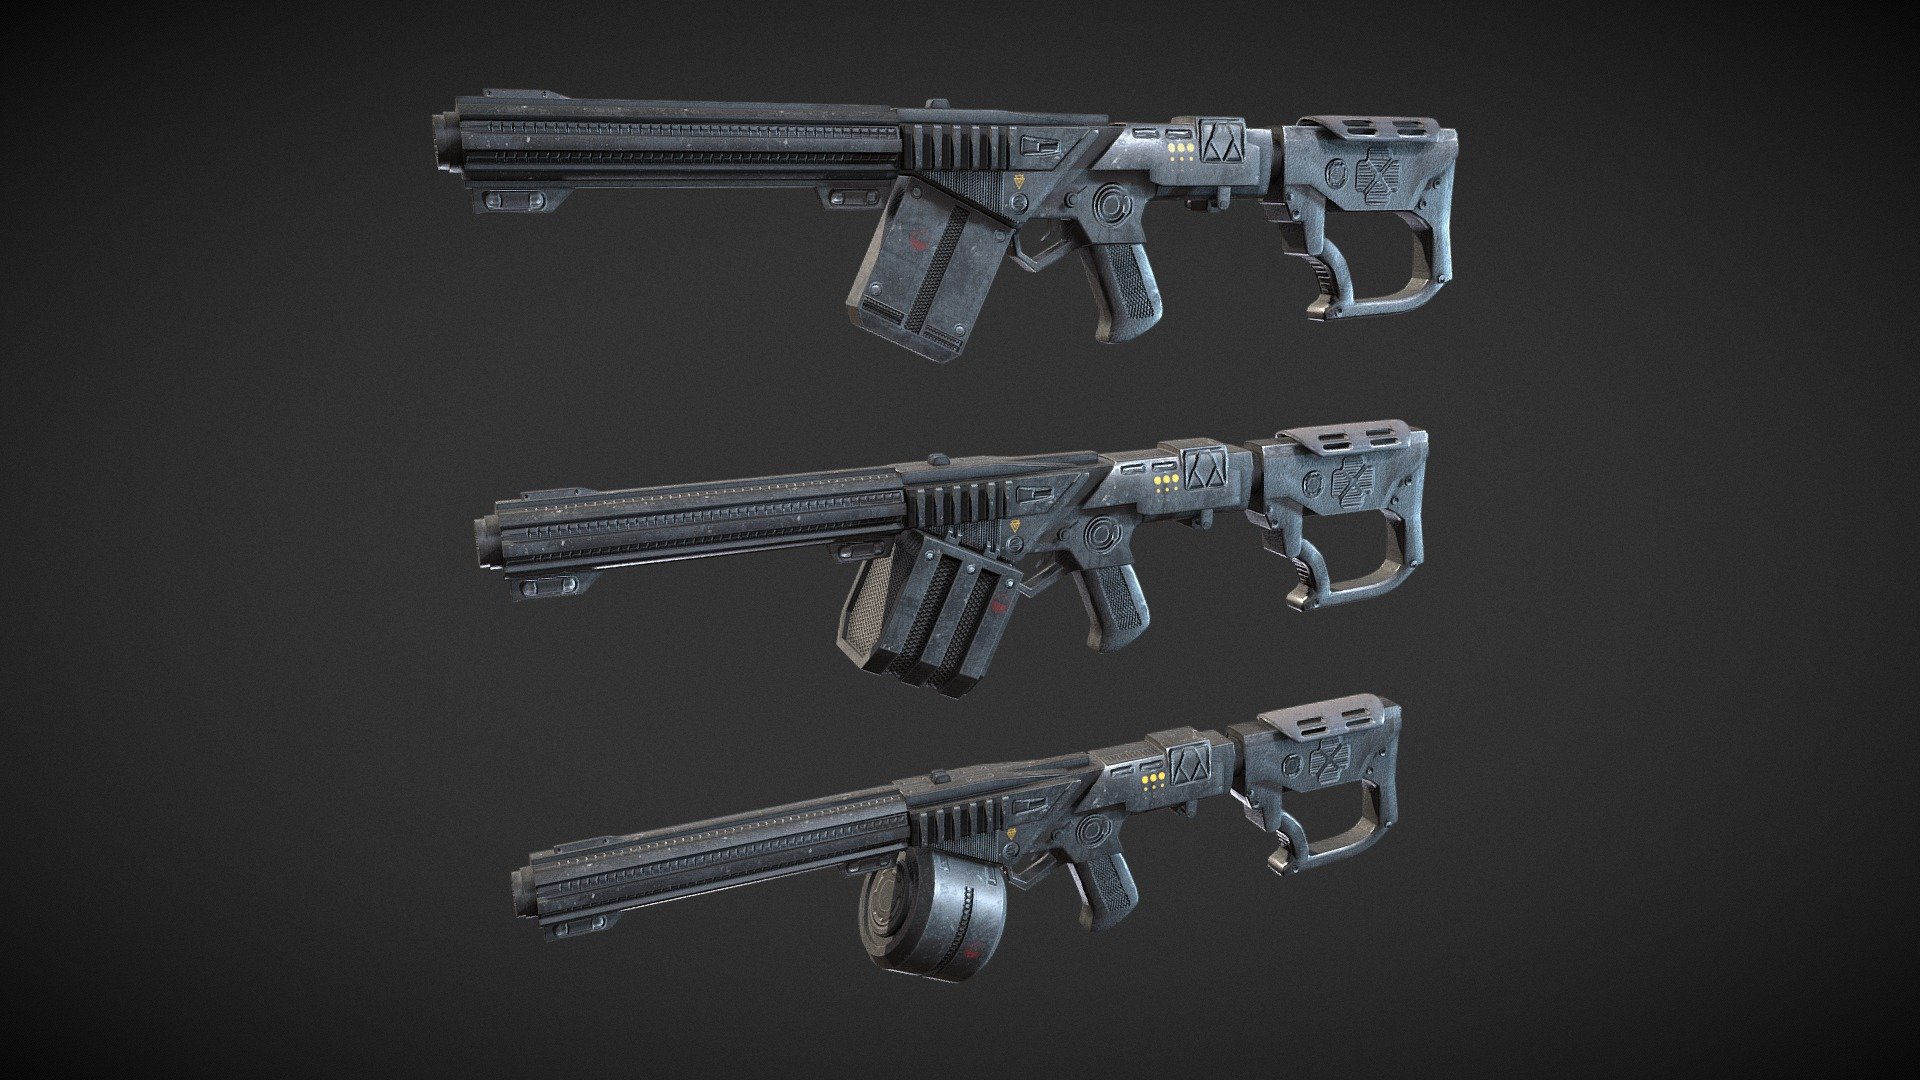 DX-18 based on Star Wars weapon styles- Model/Art by Outworld Studios

Must give credit to Outworld Studios if using this asset

Show support by joining my discord: https://discord.gg/EgWSkp8Cxn - Star Wars DX-18 - Buy Royalty Free 3D model by Outworld Studios (@outworldstudios) 3d model